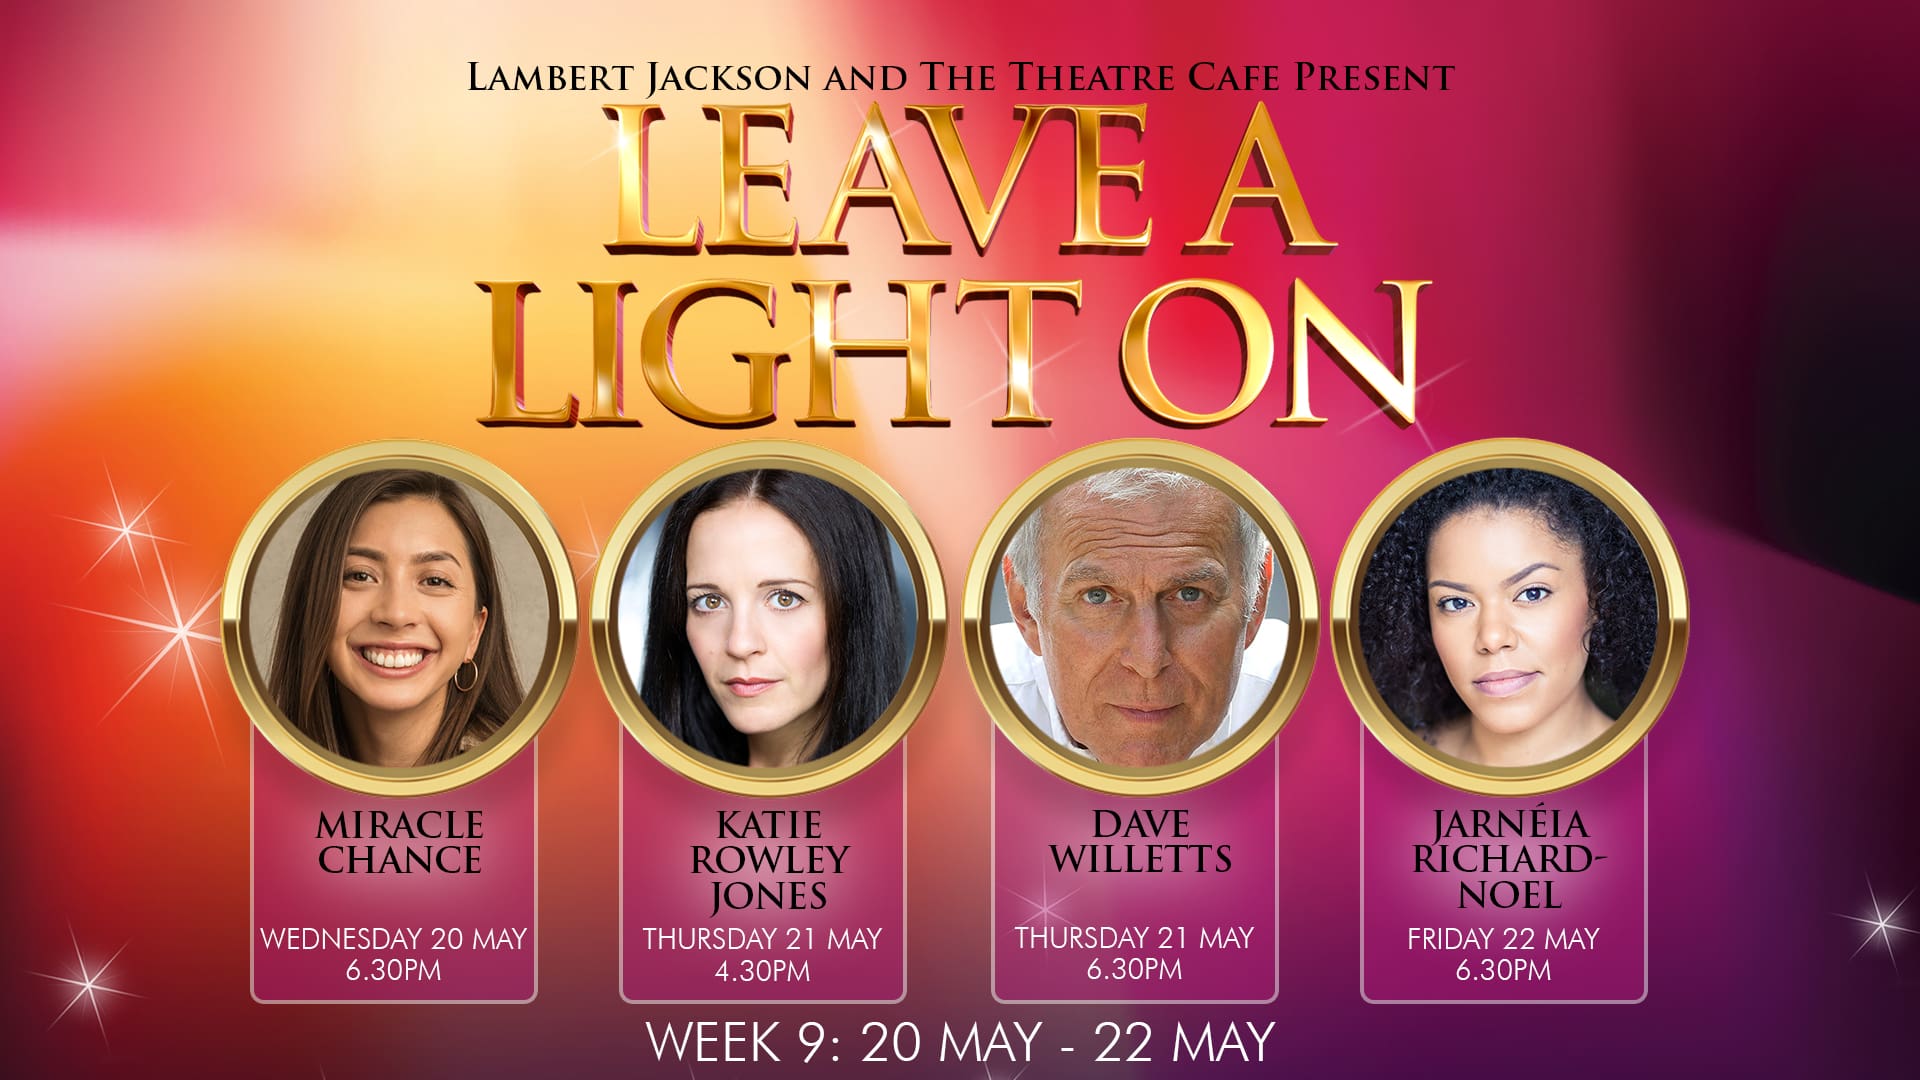 NEWS: Lineup announced for week 9 of Leave A Light On